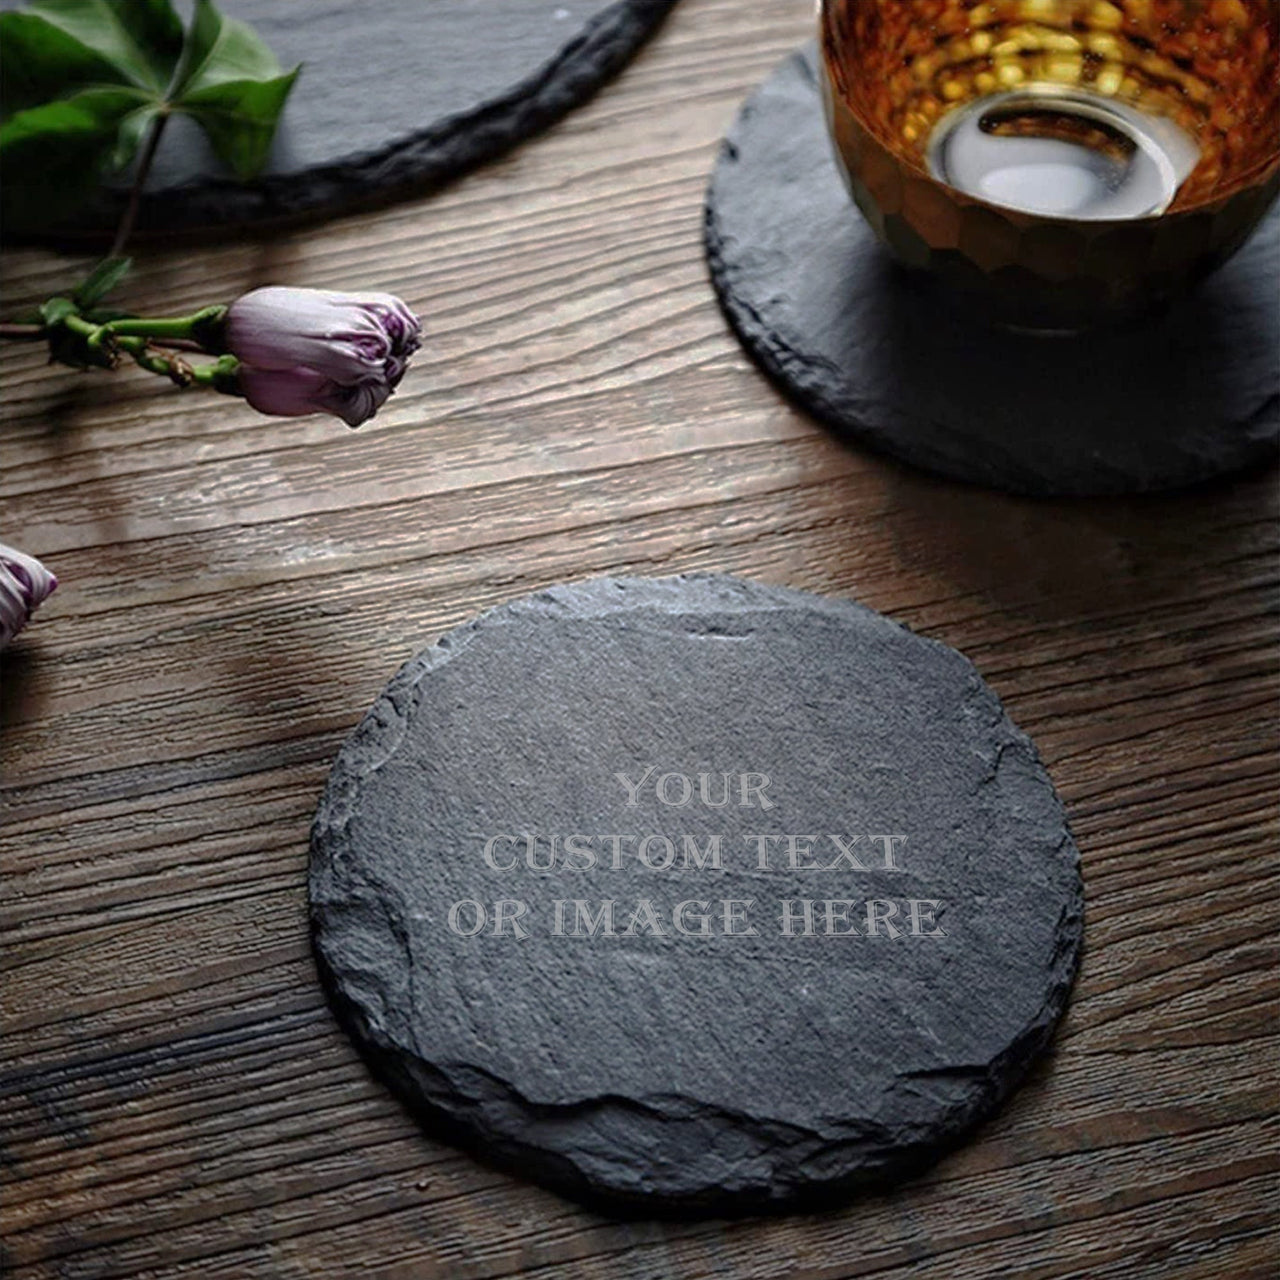 Drink Coaster, Premium Custom Slate Coaster, Father's Day Gift for Dad, Husband, Grandpa Alcohol Drinker Gift, Personalized Slate Coasters